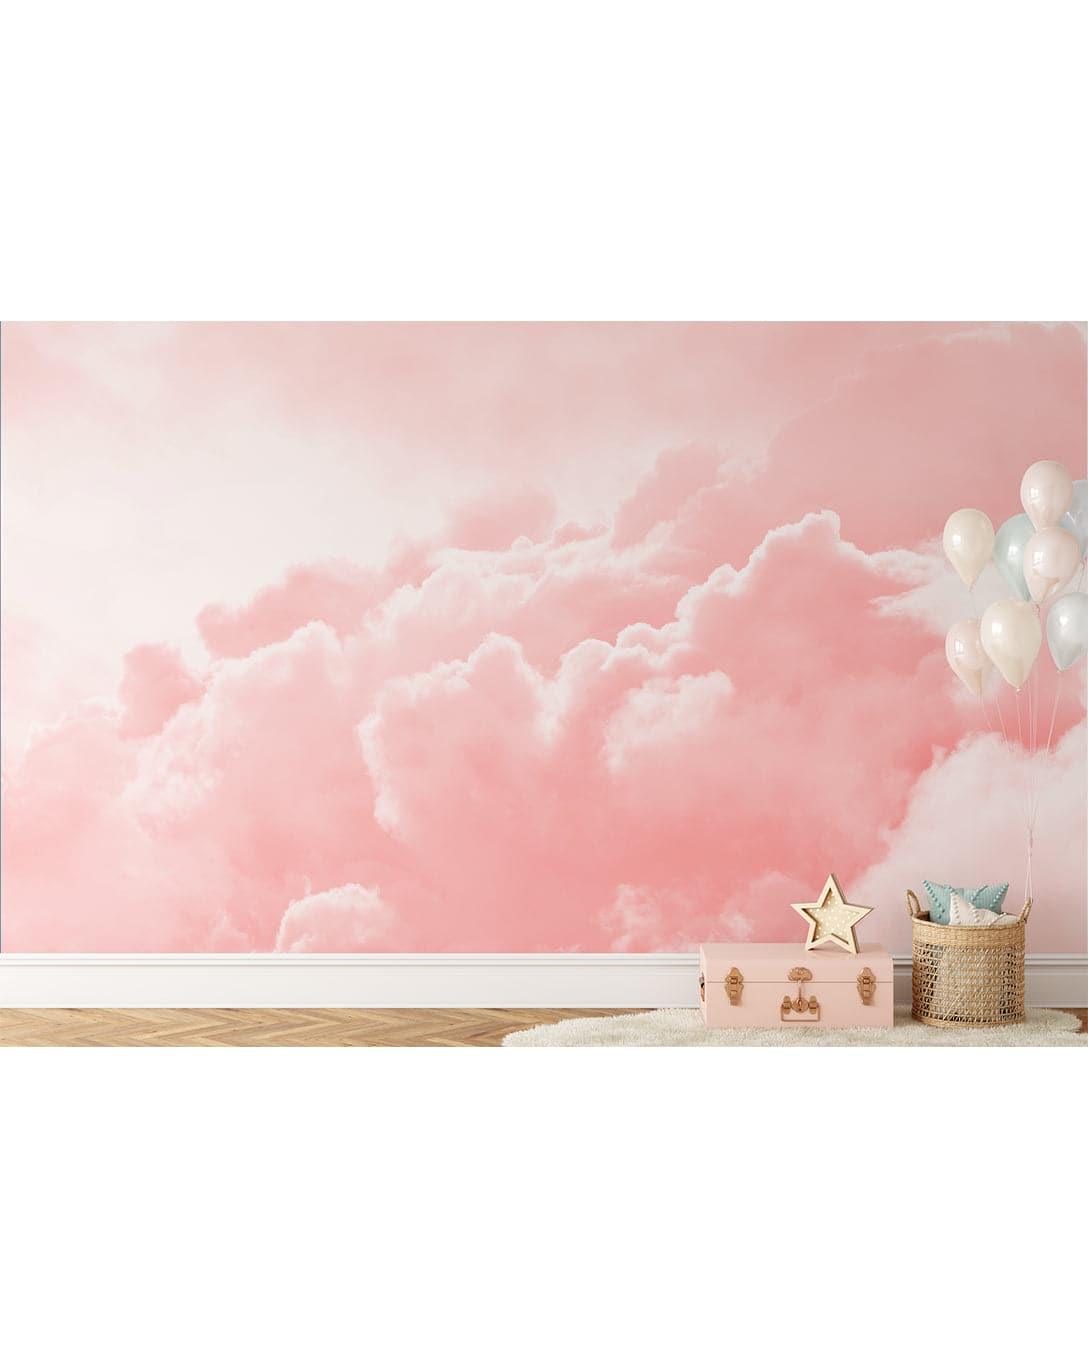 Watercolor Forest Fairy Kids Botanical Wall Mural Watercolor Forest Fairy Kids Botanical Wall Mural Pastel Pink Sky Clouds Bedroom Wall Mural 